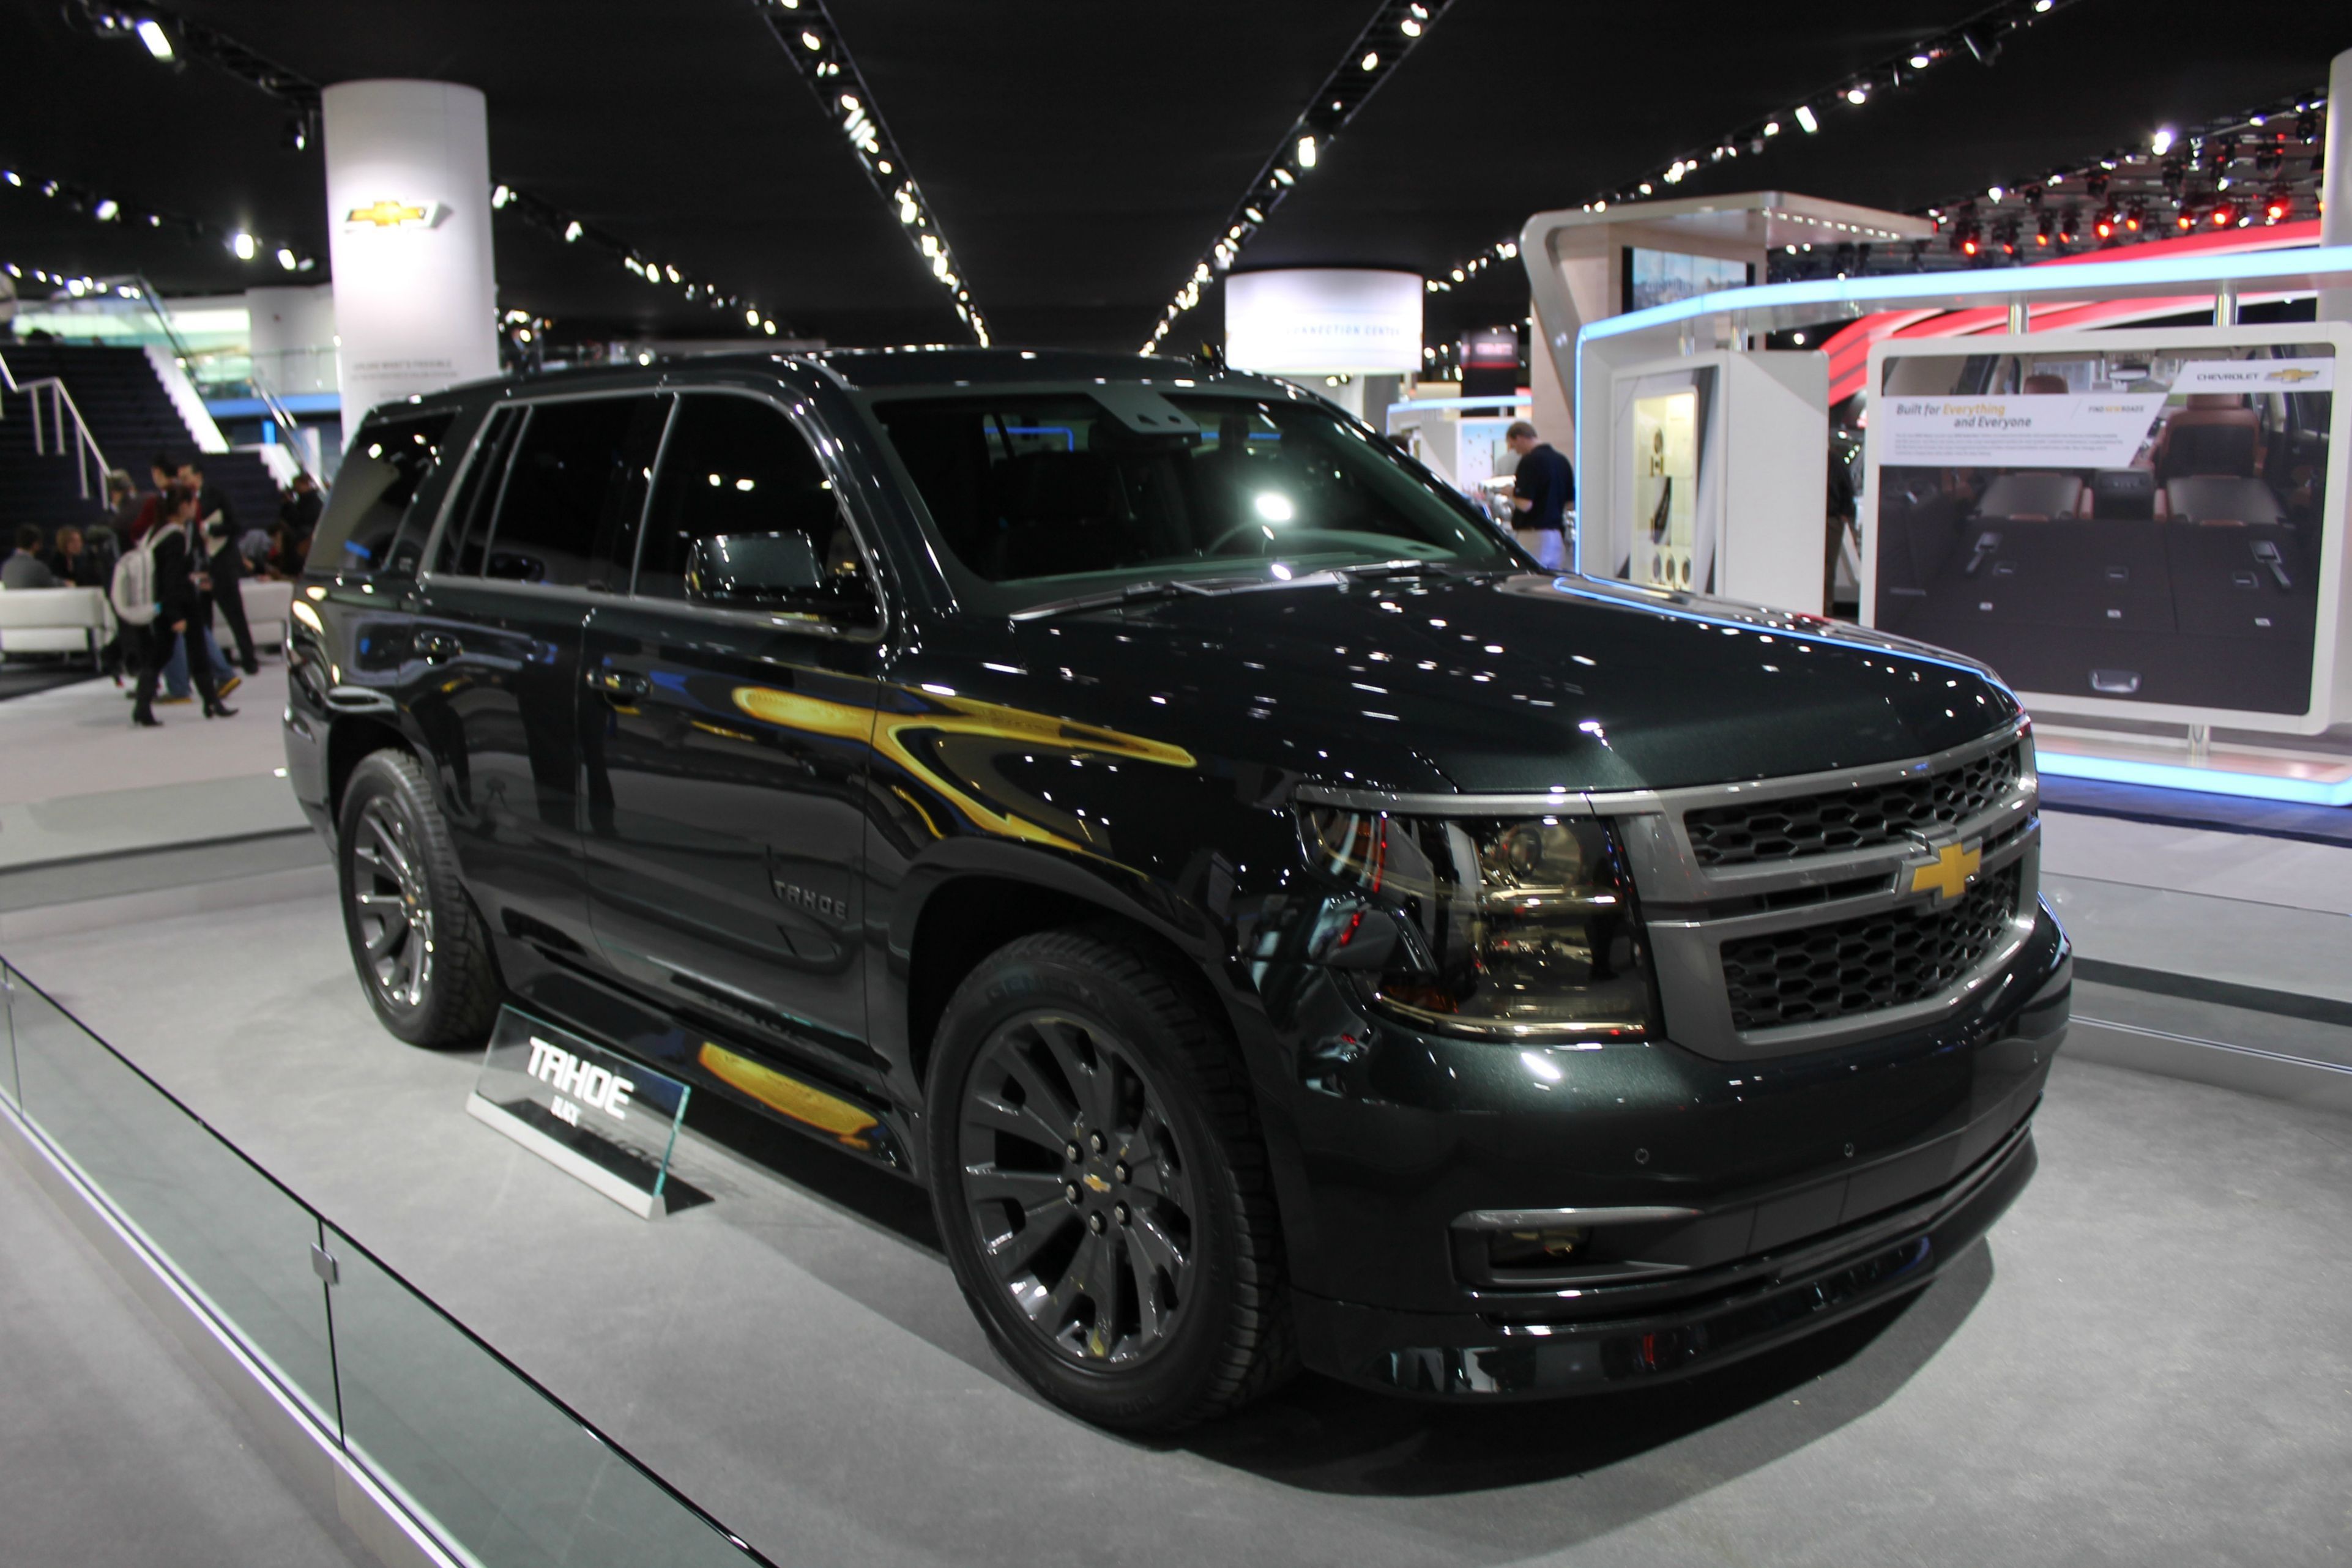 Chevrolet Tahoe Black Picture Wallpaper About Cool Cars